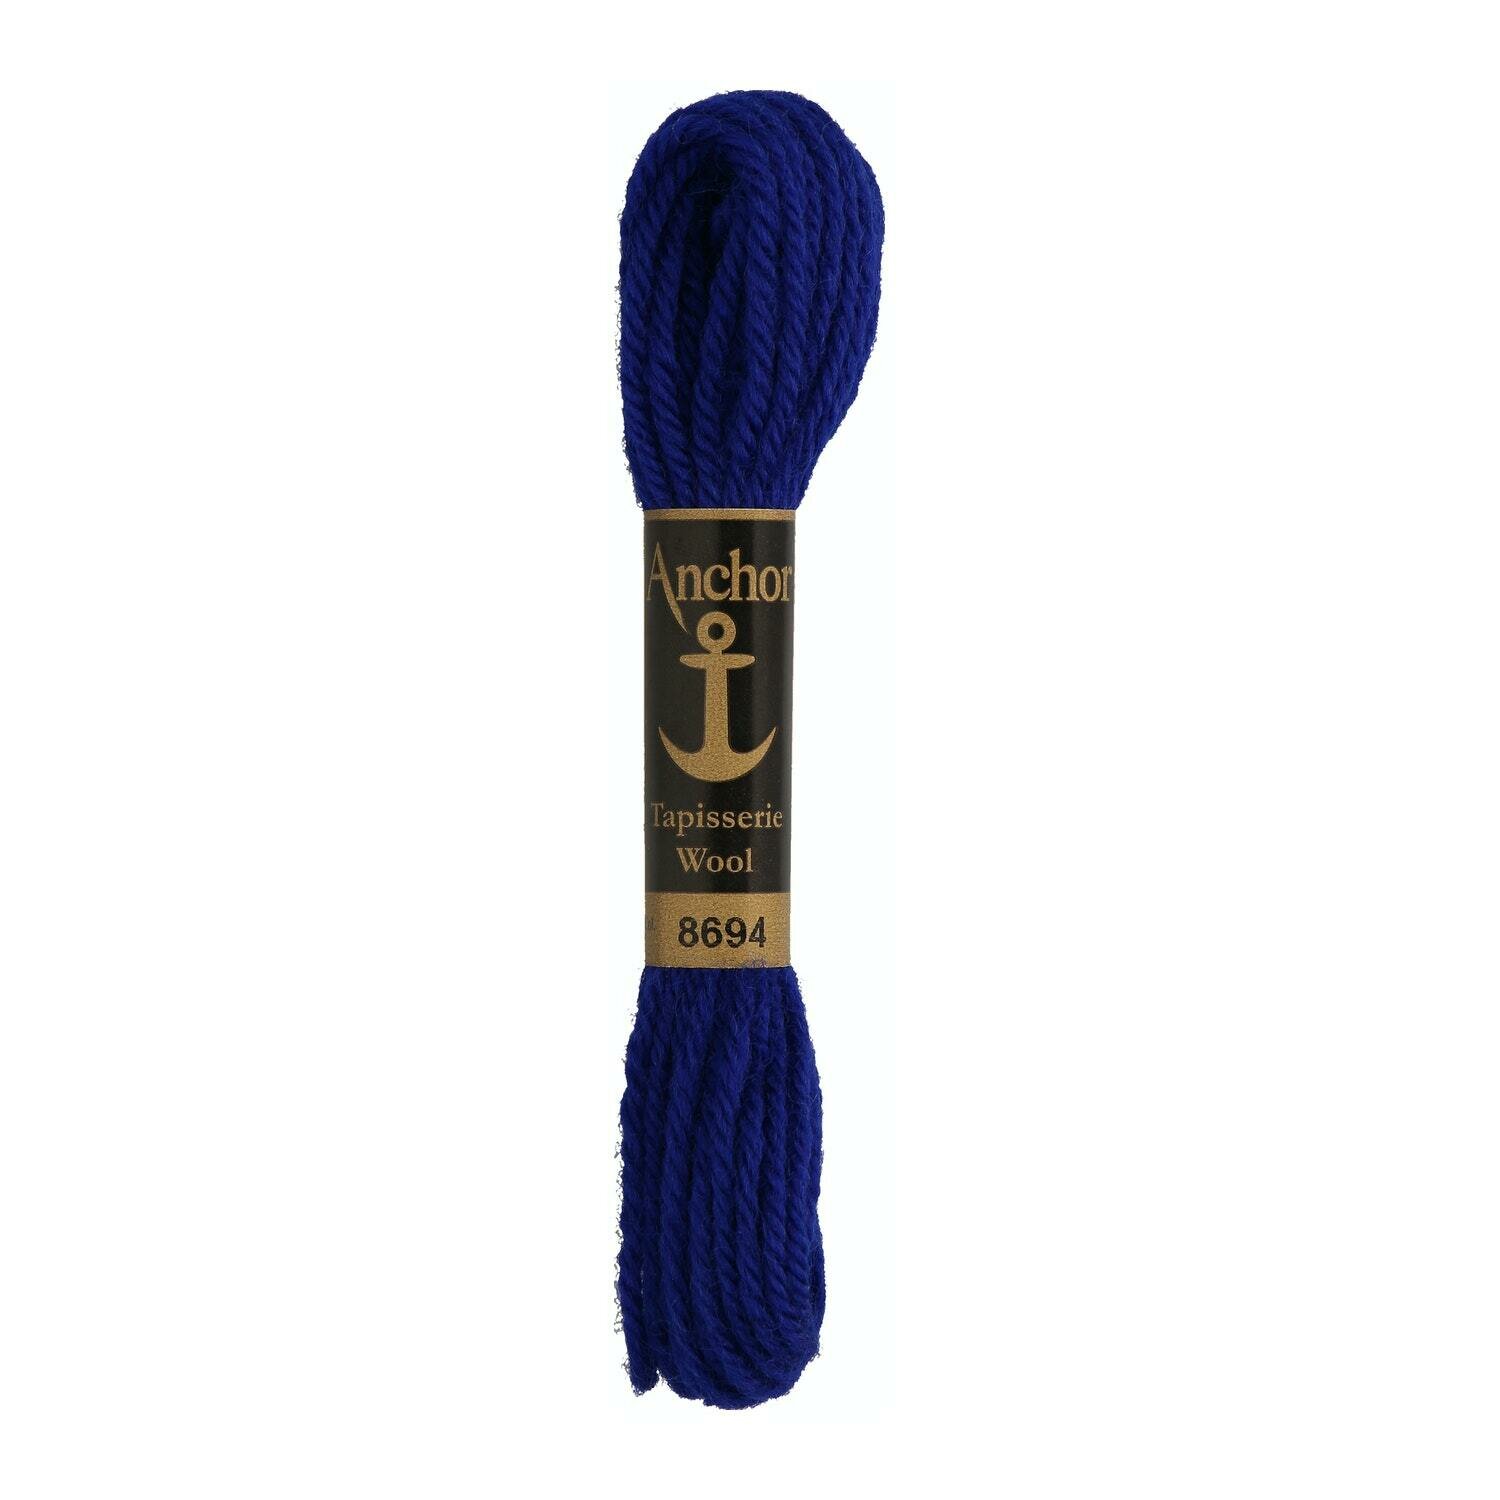 Anchor Tapisserie Wool # 08694